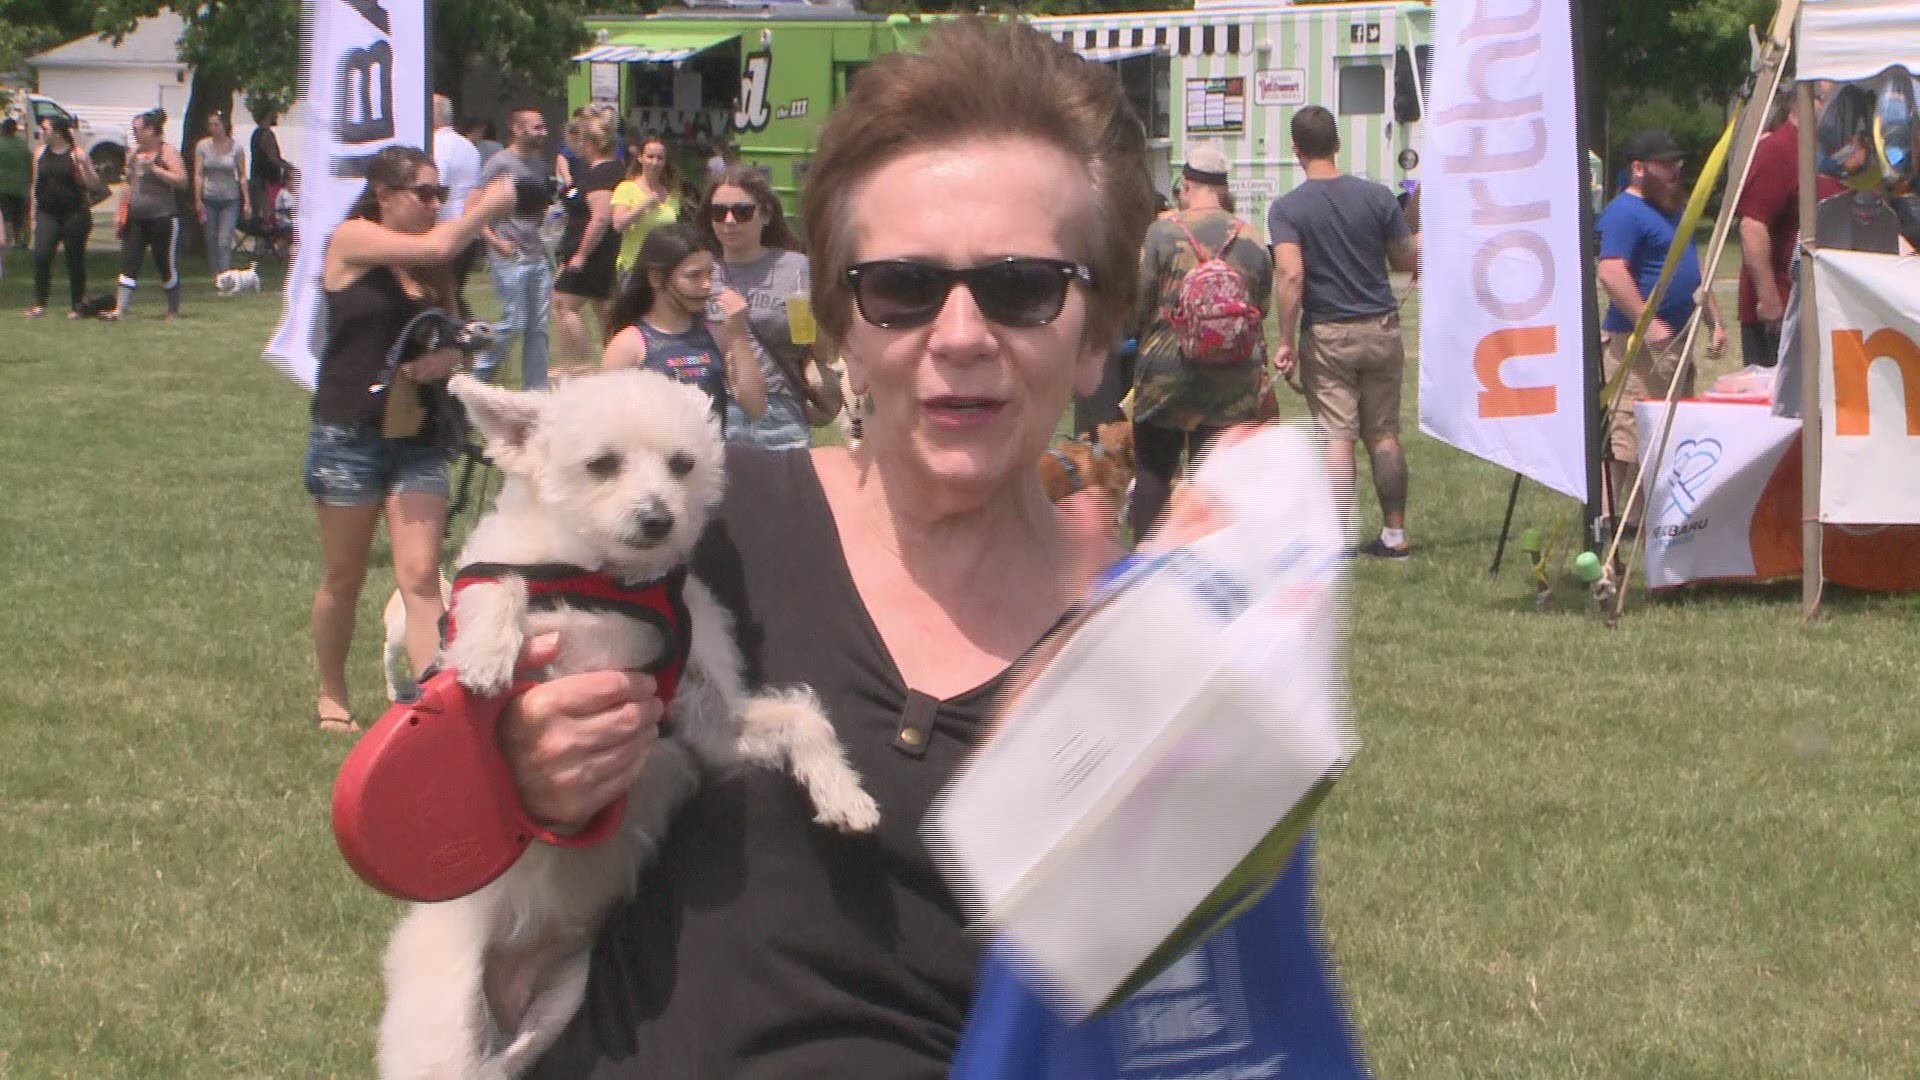 The free event hosted every year at Mang Park celebrates dogs and the enjoyment they bring to our lives! volunteers with the Kenmore Village Improvement Society also were on hand to showcase area rescue groups, animal care services, and dog related vend